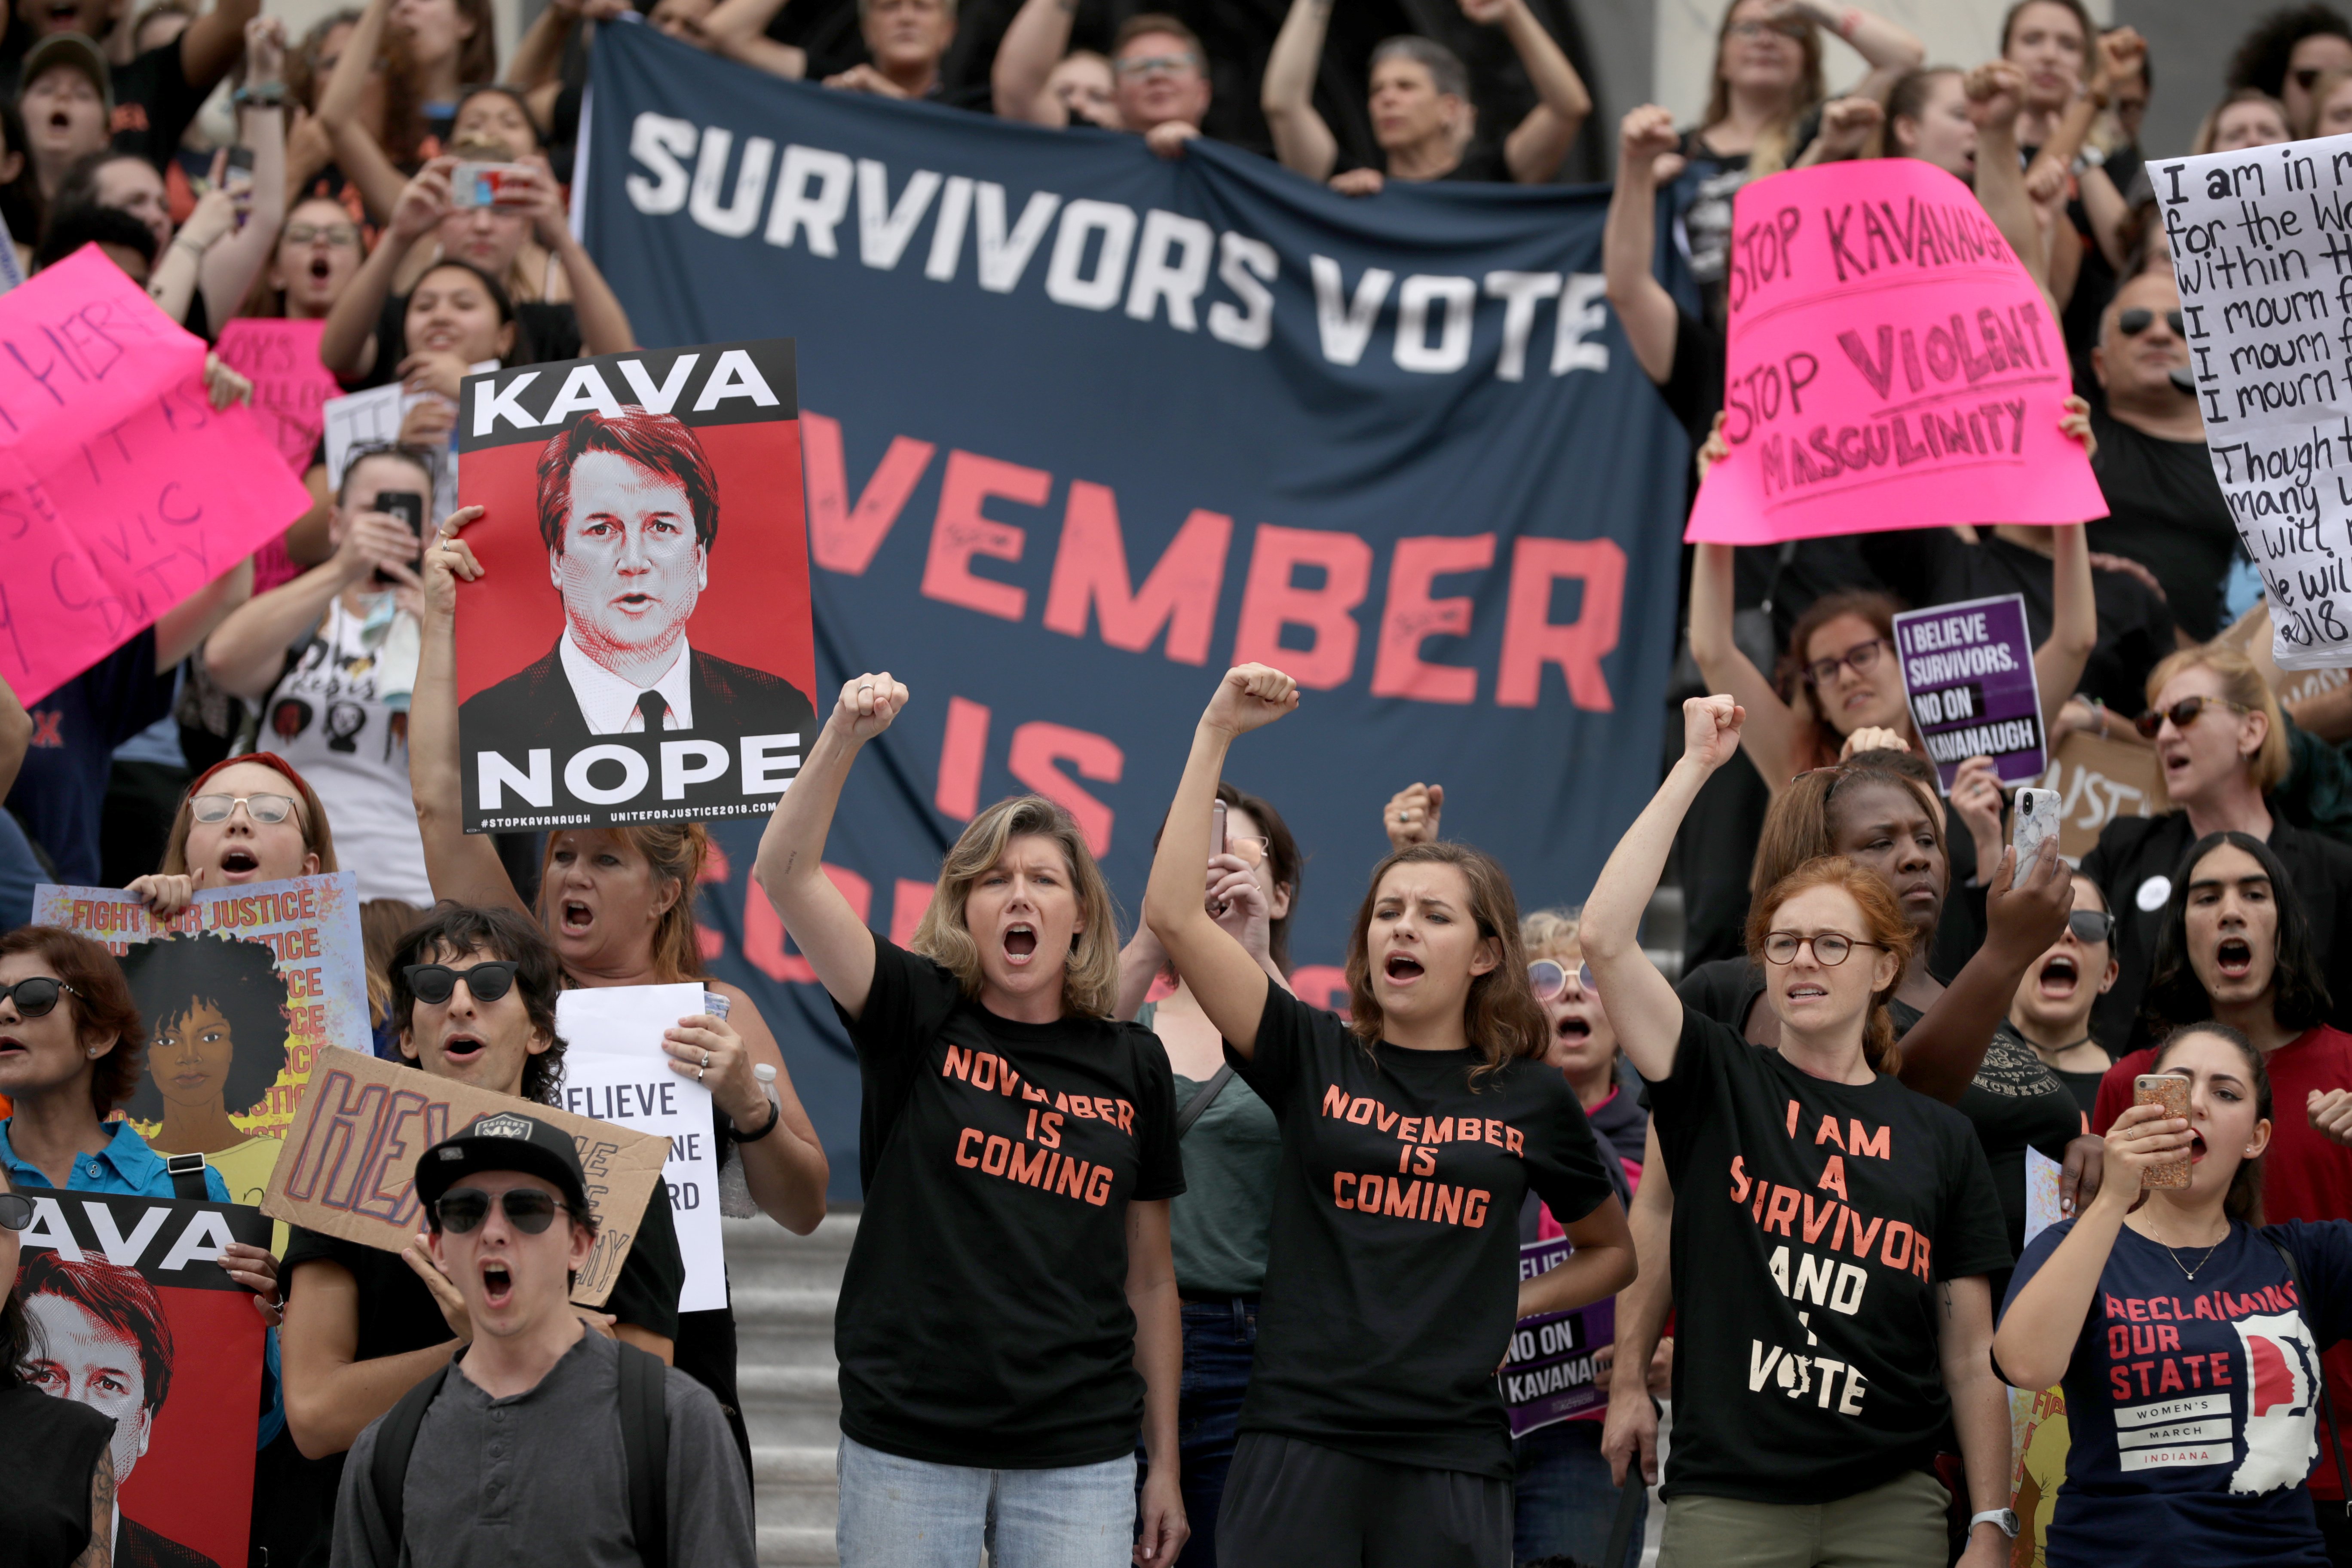 WASHINGTON, DC - OCTOBER 06: Hundreds of protesters occupy the center steps of the East Front of the U.S. Capitol after breaking through barricades to demonstrate against the confirmation of Supreme Court nominee Judge Brett Kavanaugh October 06, 2018 in Washington, DC. The Senate is scheduled to vote on Kavanaugh's confirmation later in the day. (Photo by Chip Somodevilla/Getty Images)